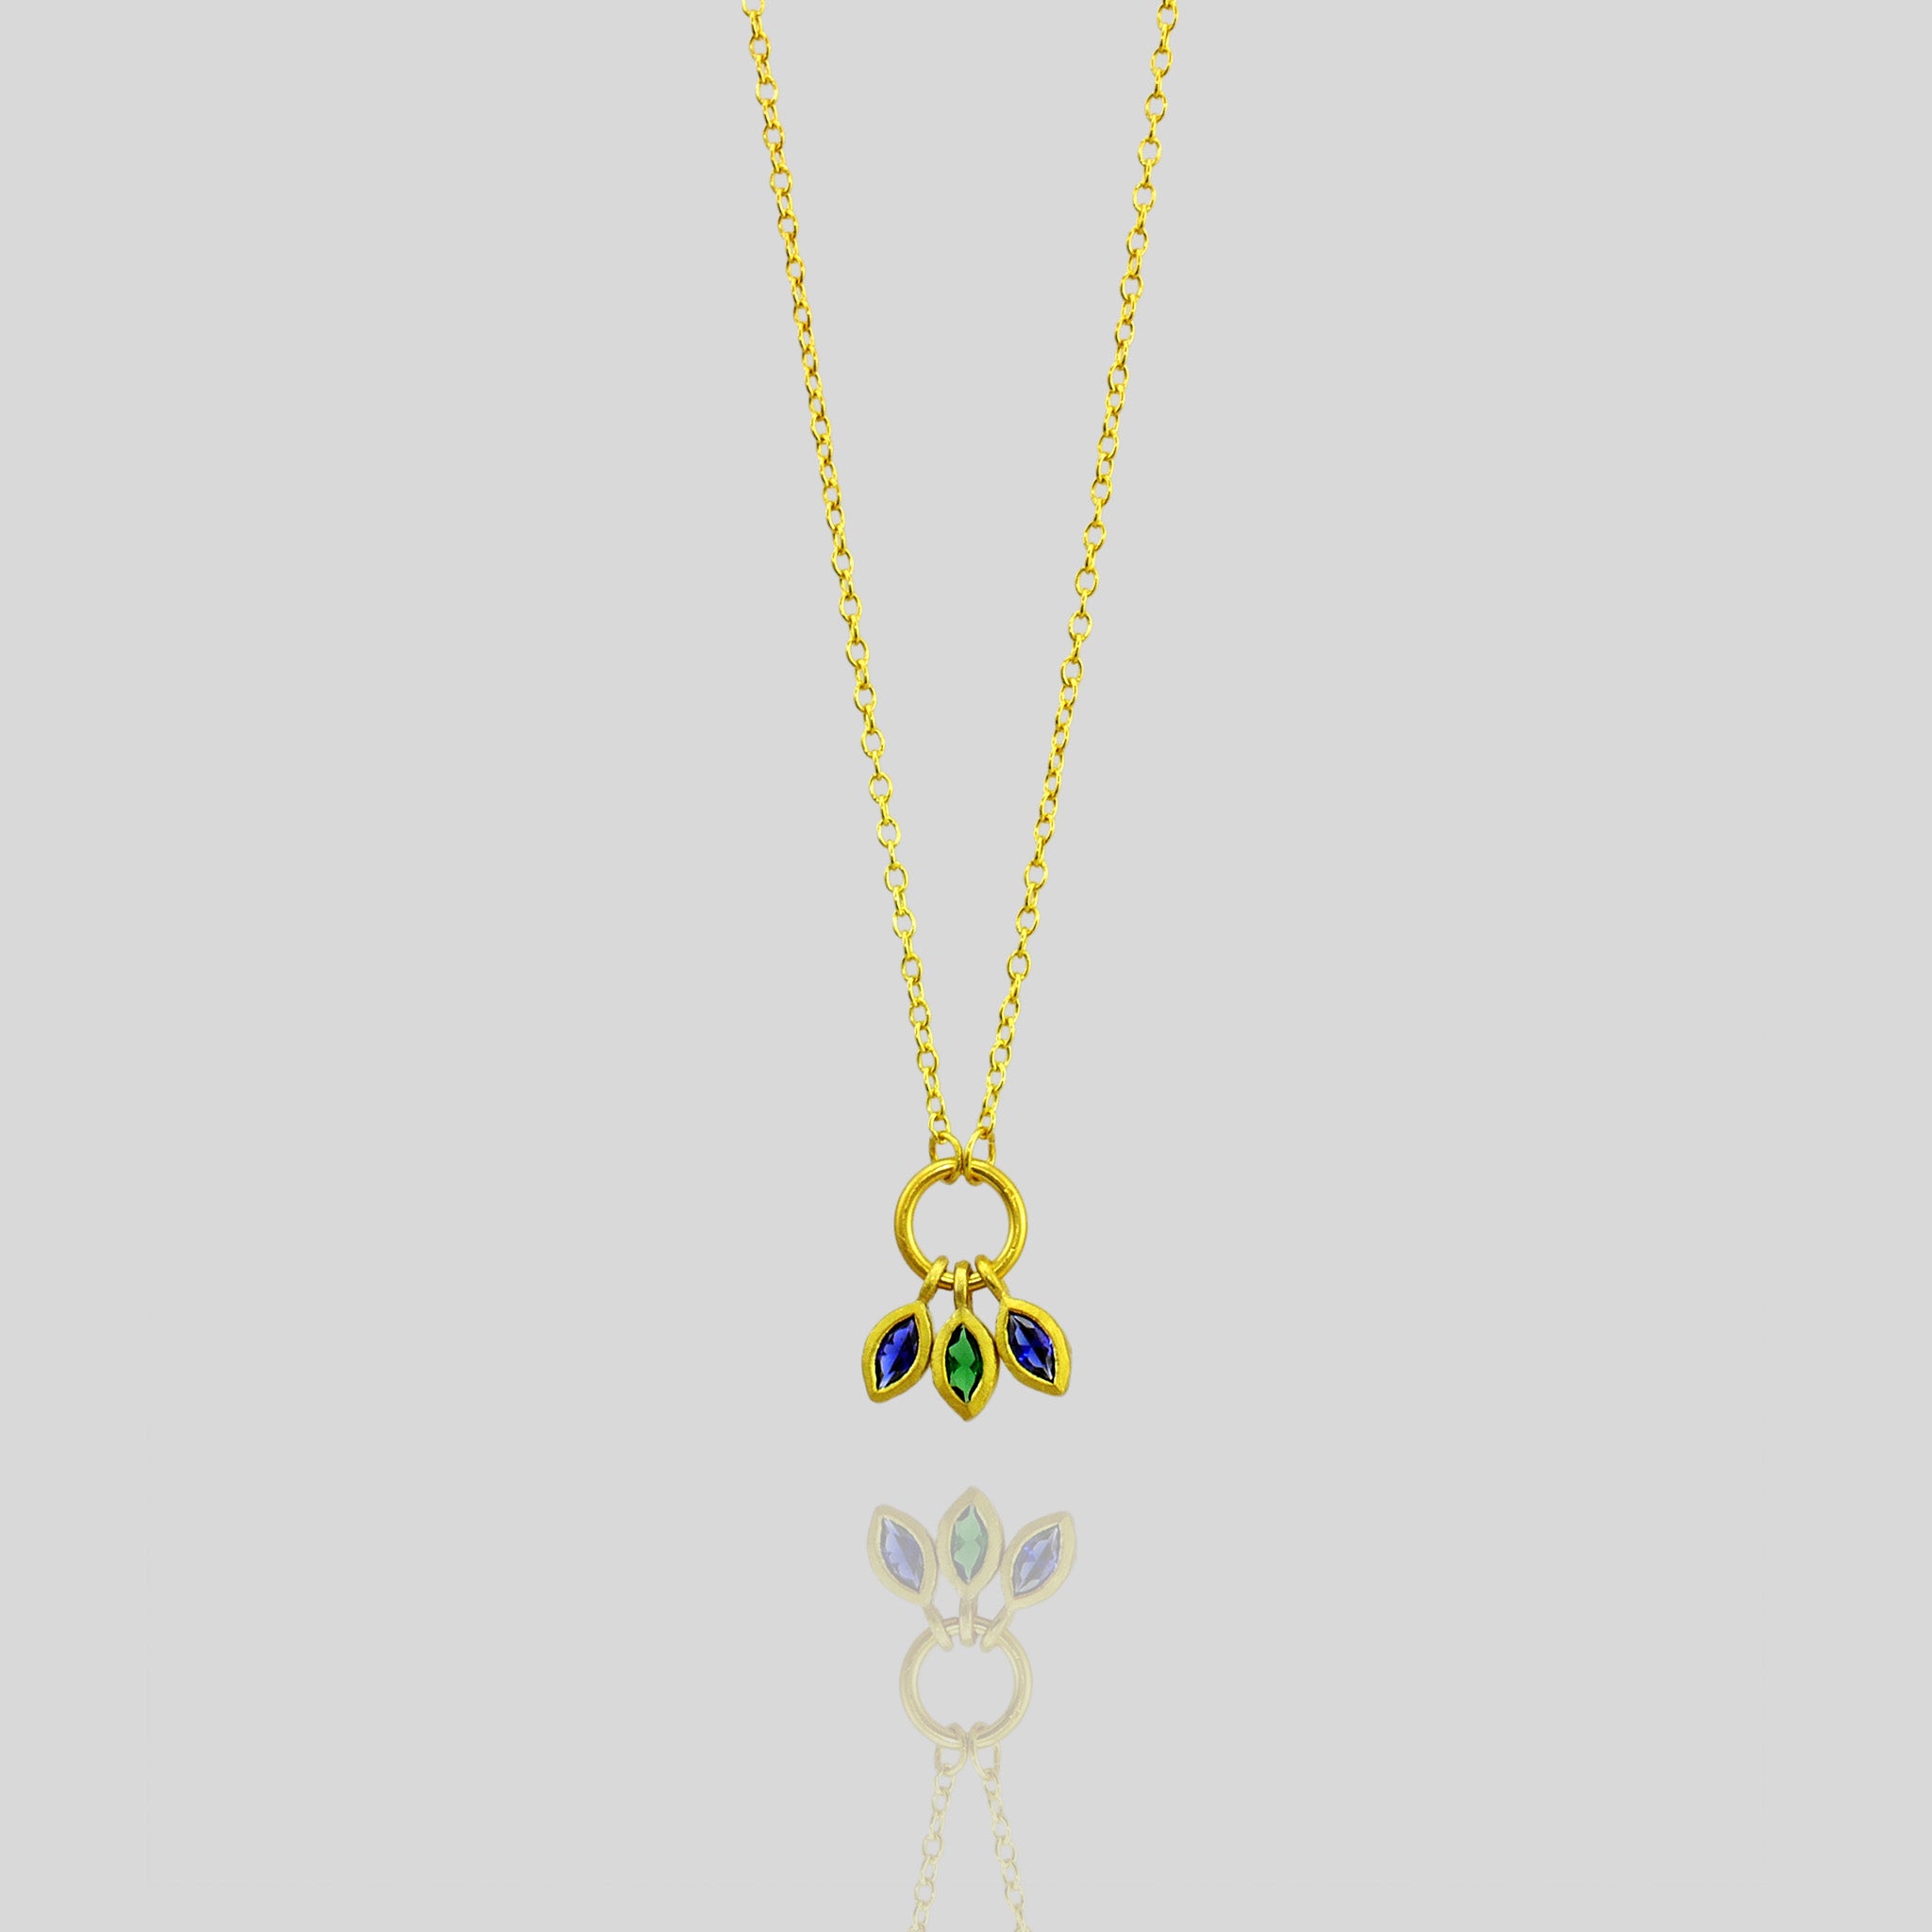 18k Gold Marquee pendant with three precisely cut gemstones, an emerald and two sapphires, combining to offer a vibrant mix of color and elegance.